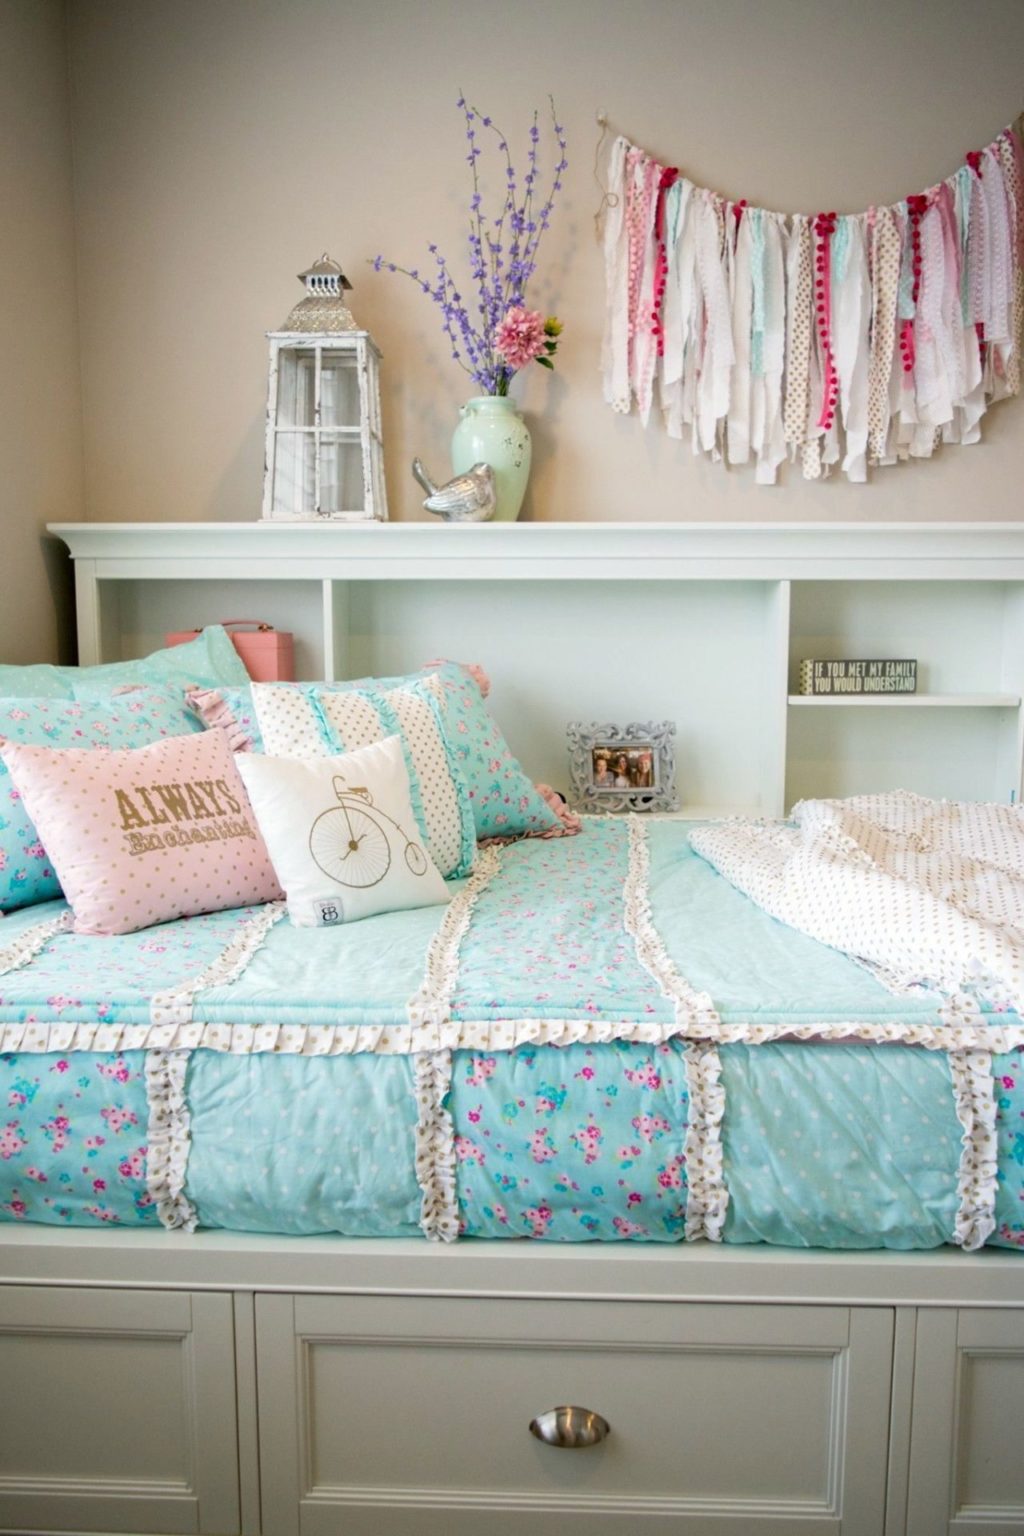 Best Turquoise Shabby Chic Bedrooms on bathroom unqual com